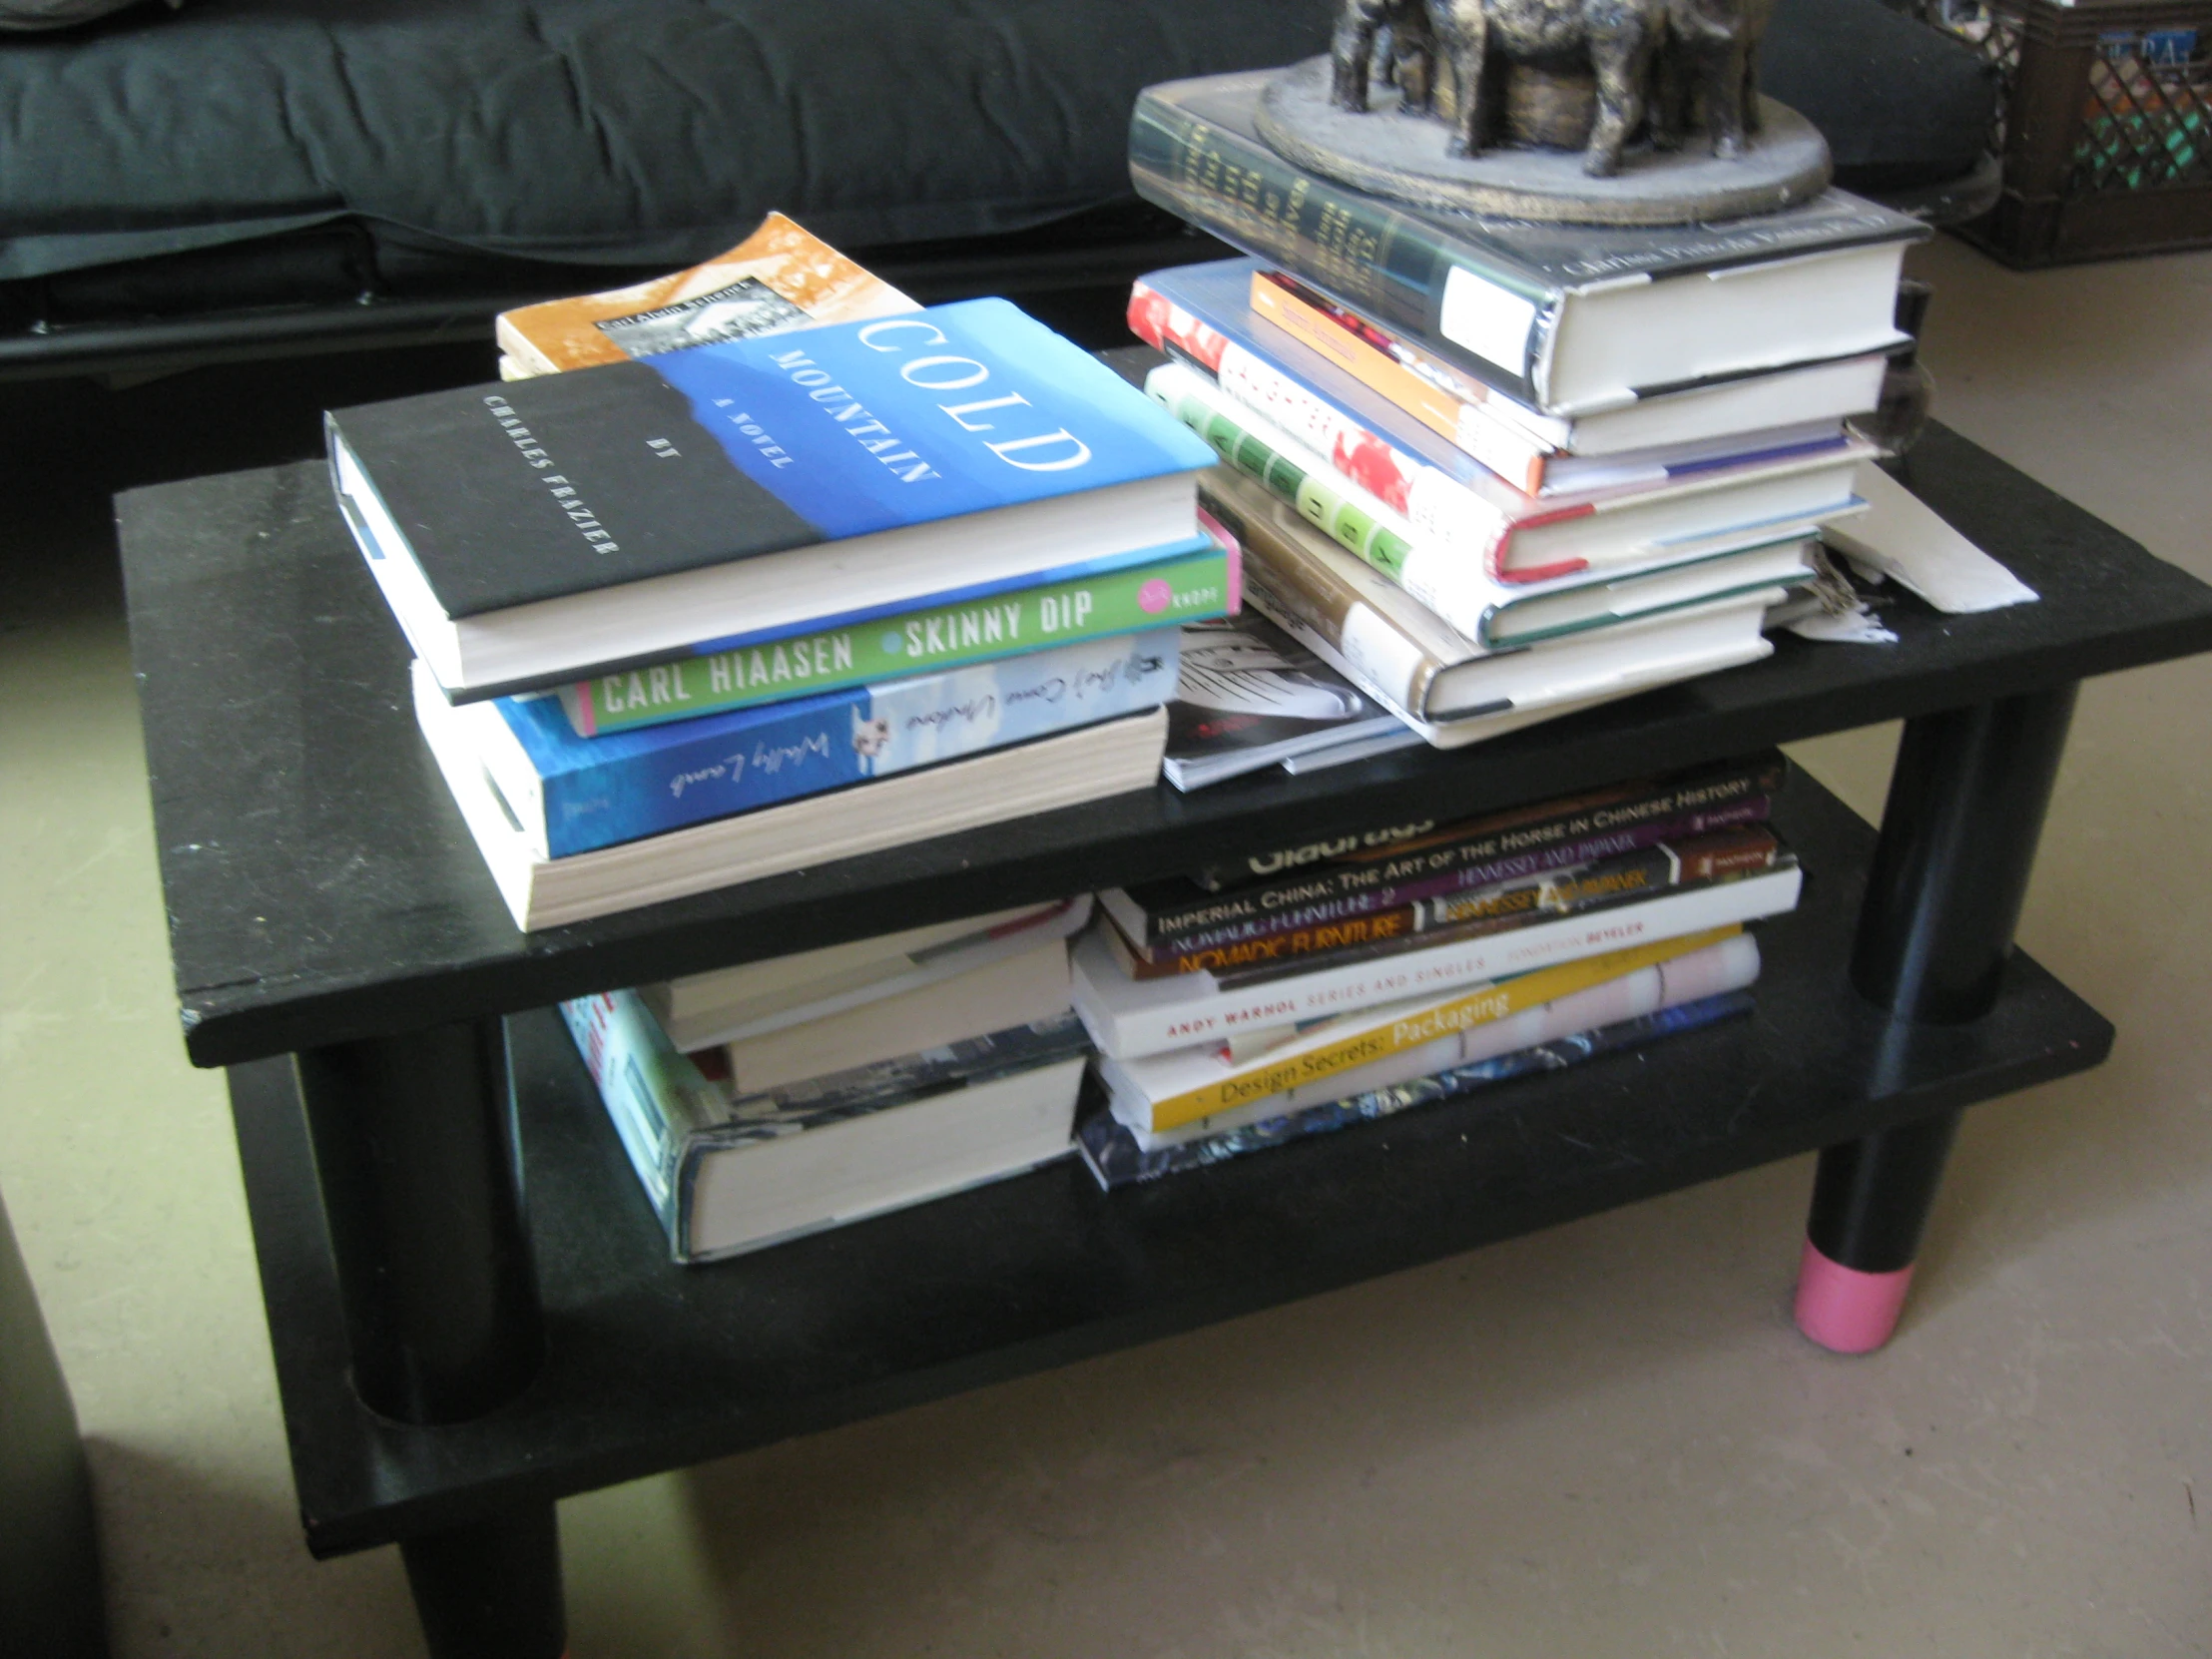 a coffee table filled with books and a little elephant figure